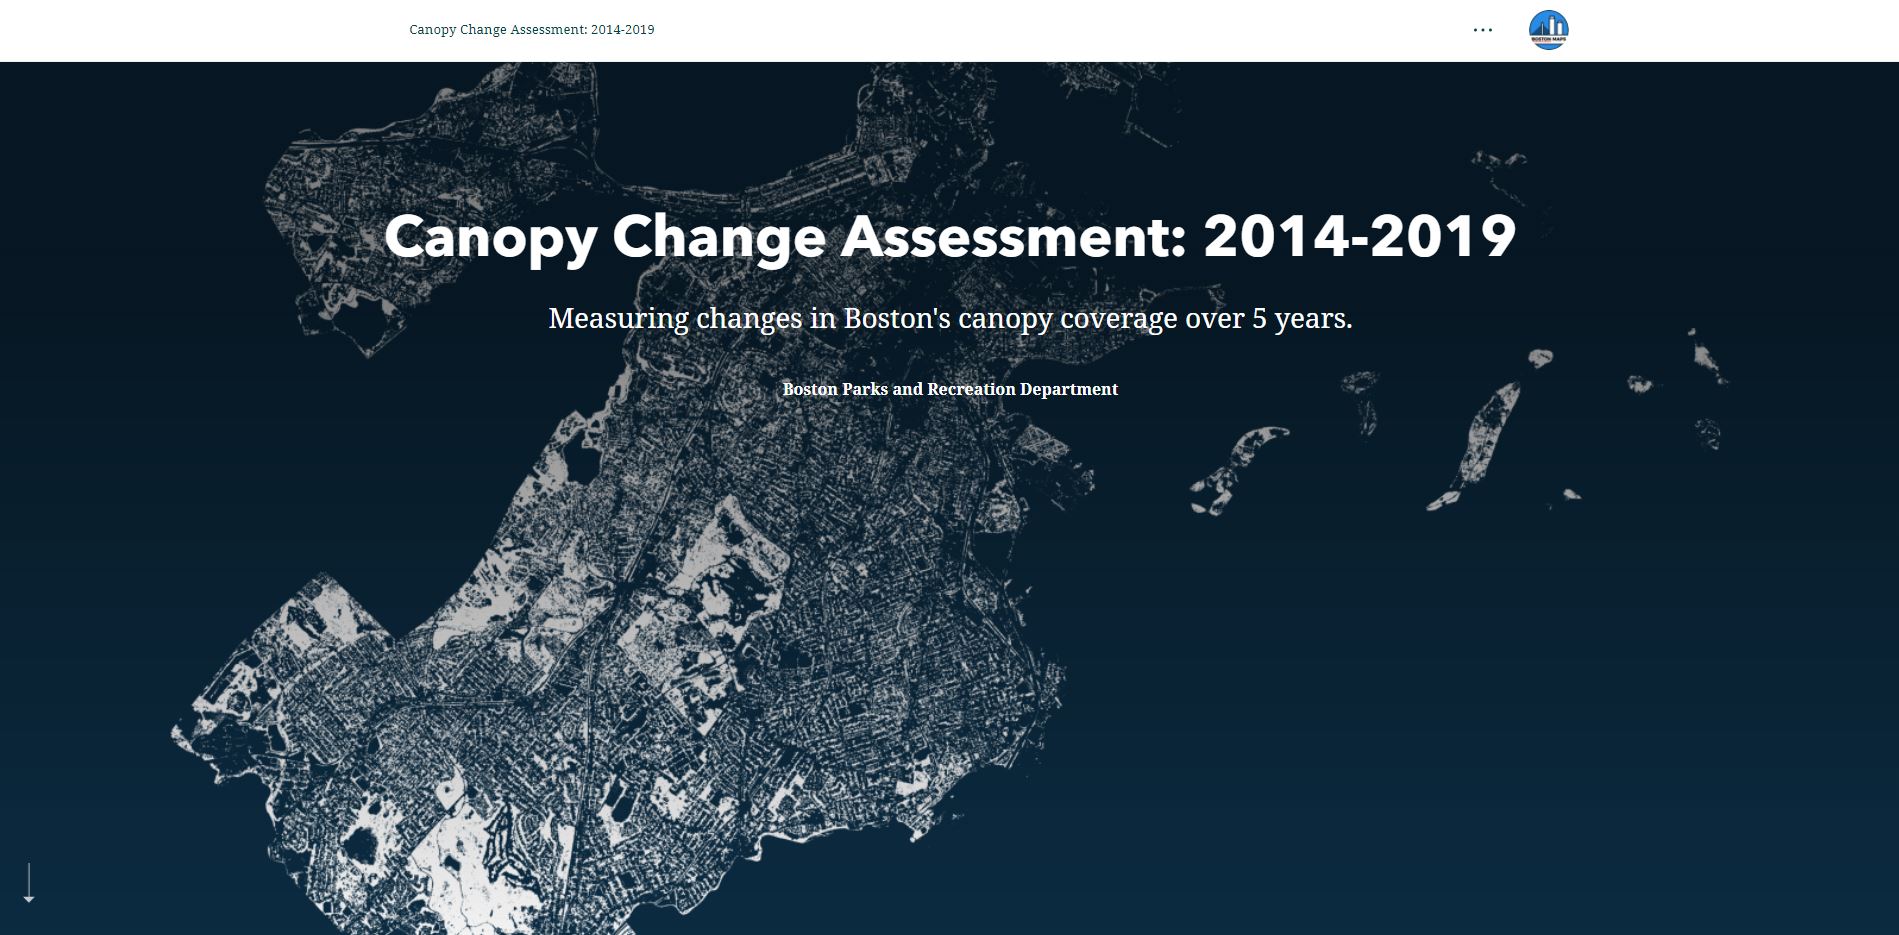 Canopy Change Assessment: 2014-2019